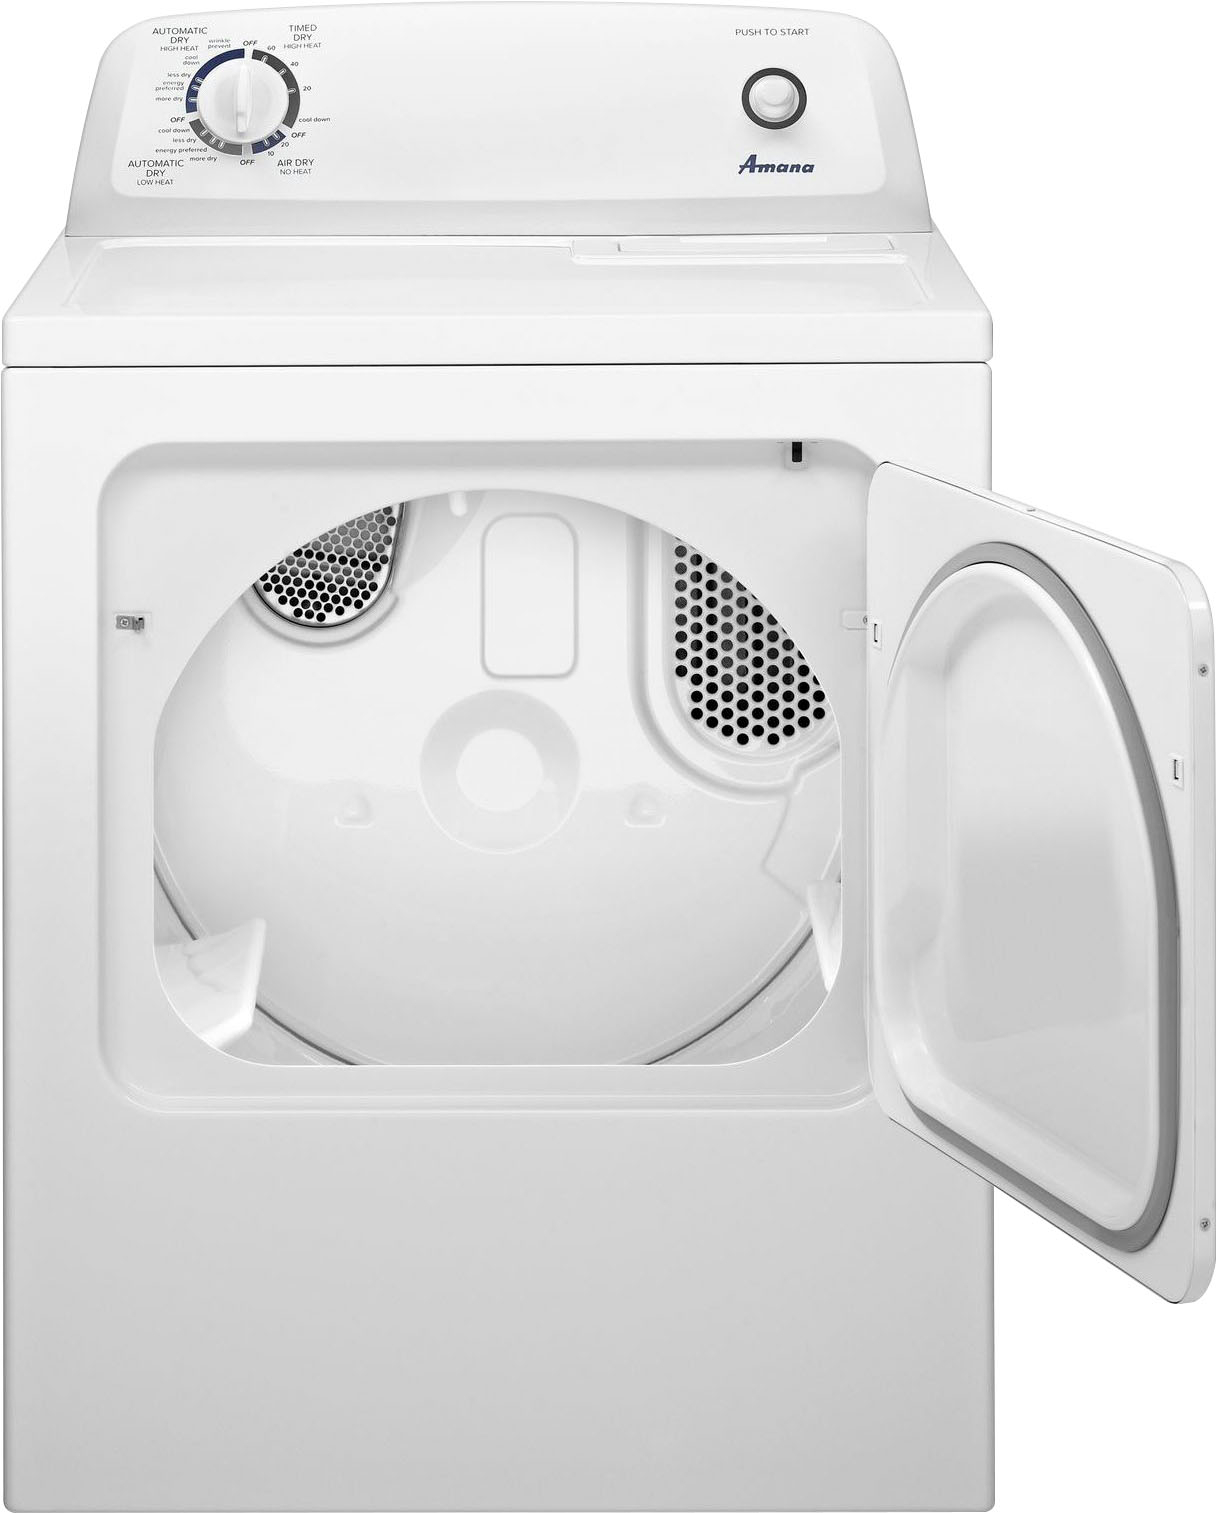 Angle View: Amana 6.5 cu ft Electric Dryer in White